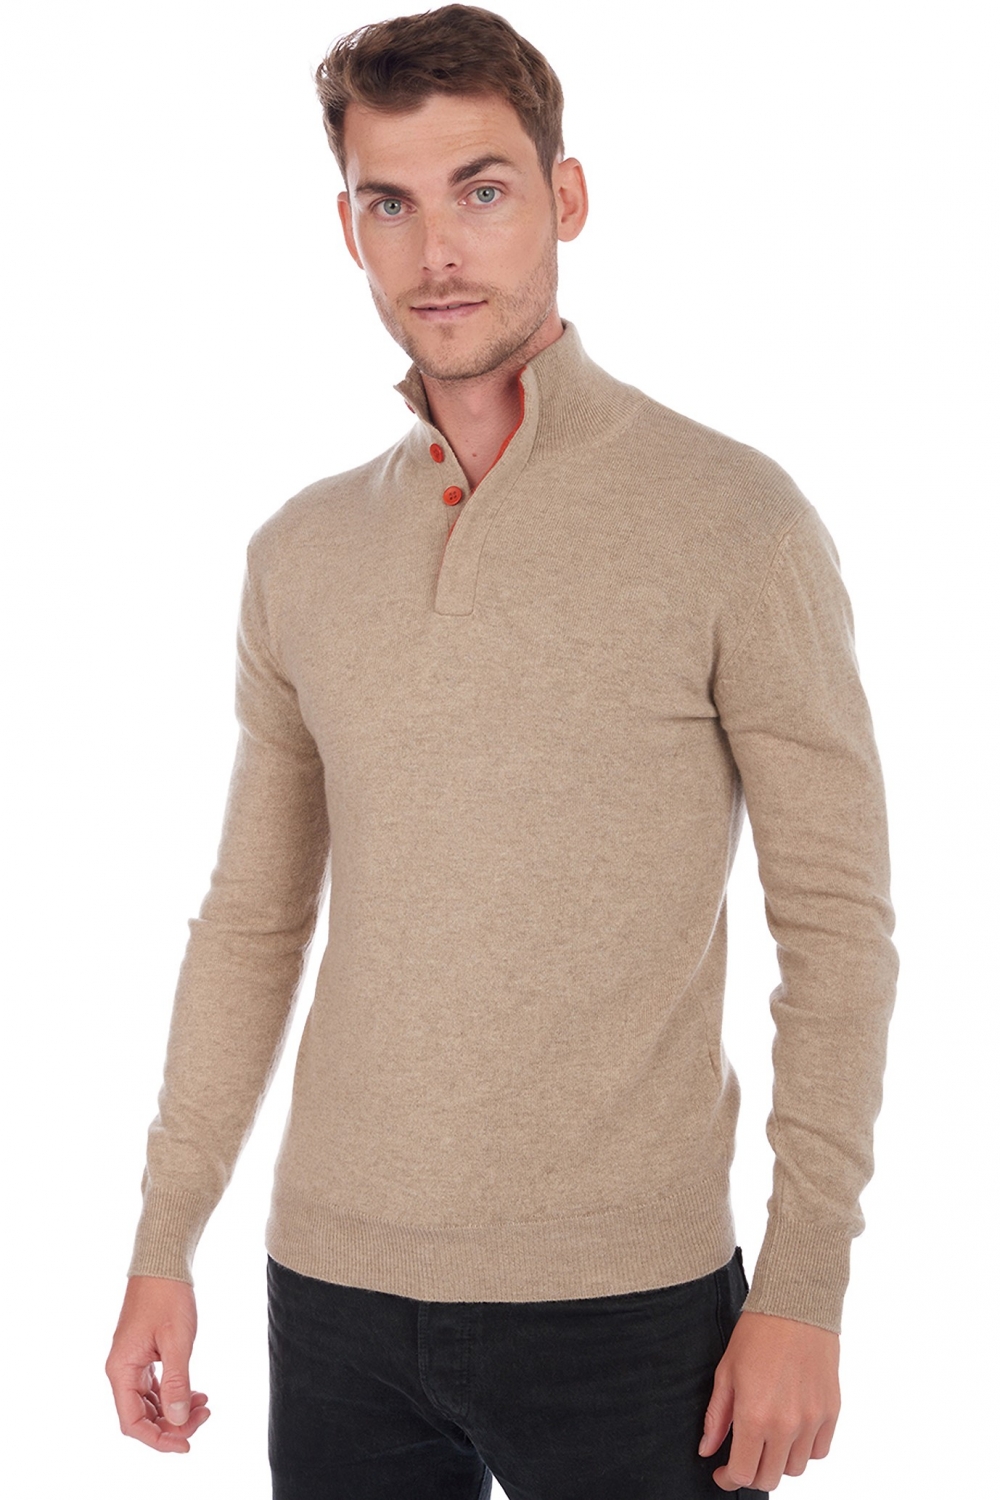 Cashmere men polo style sweaters gauvain natural brown paprika s